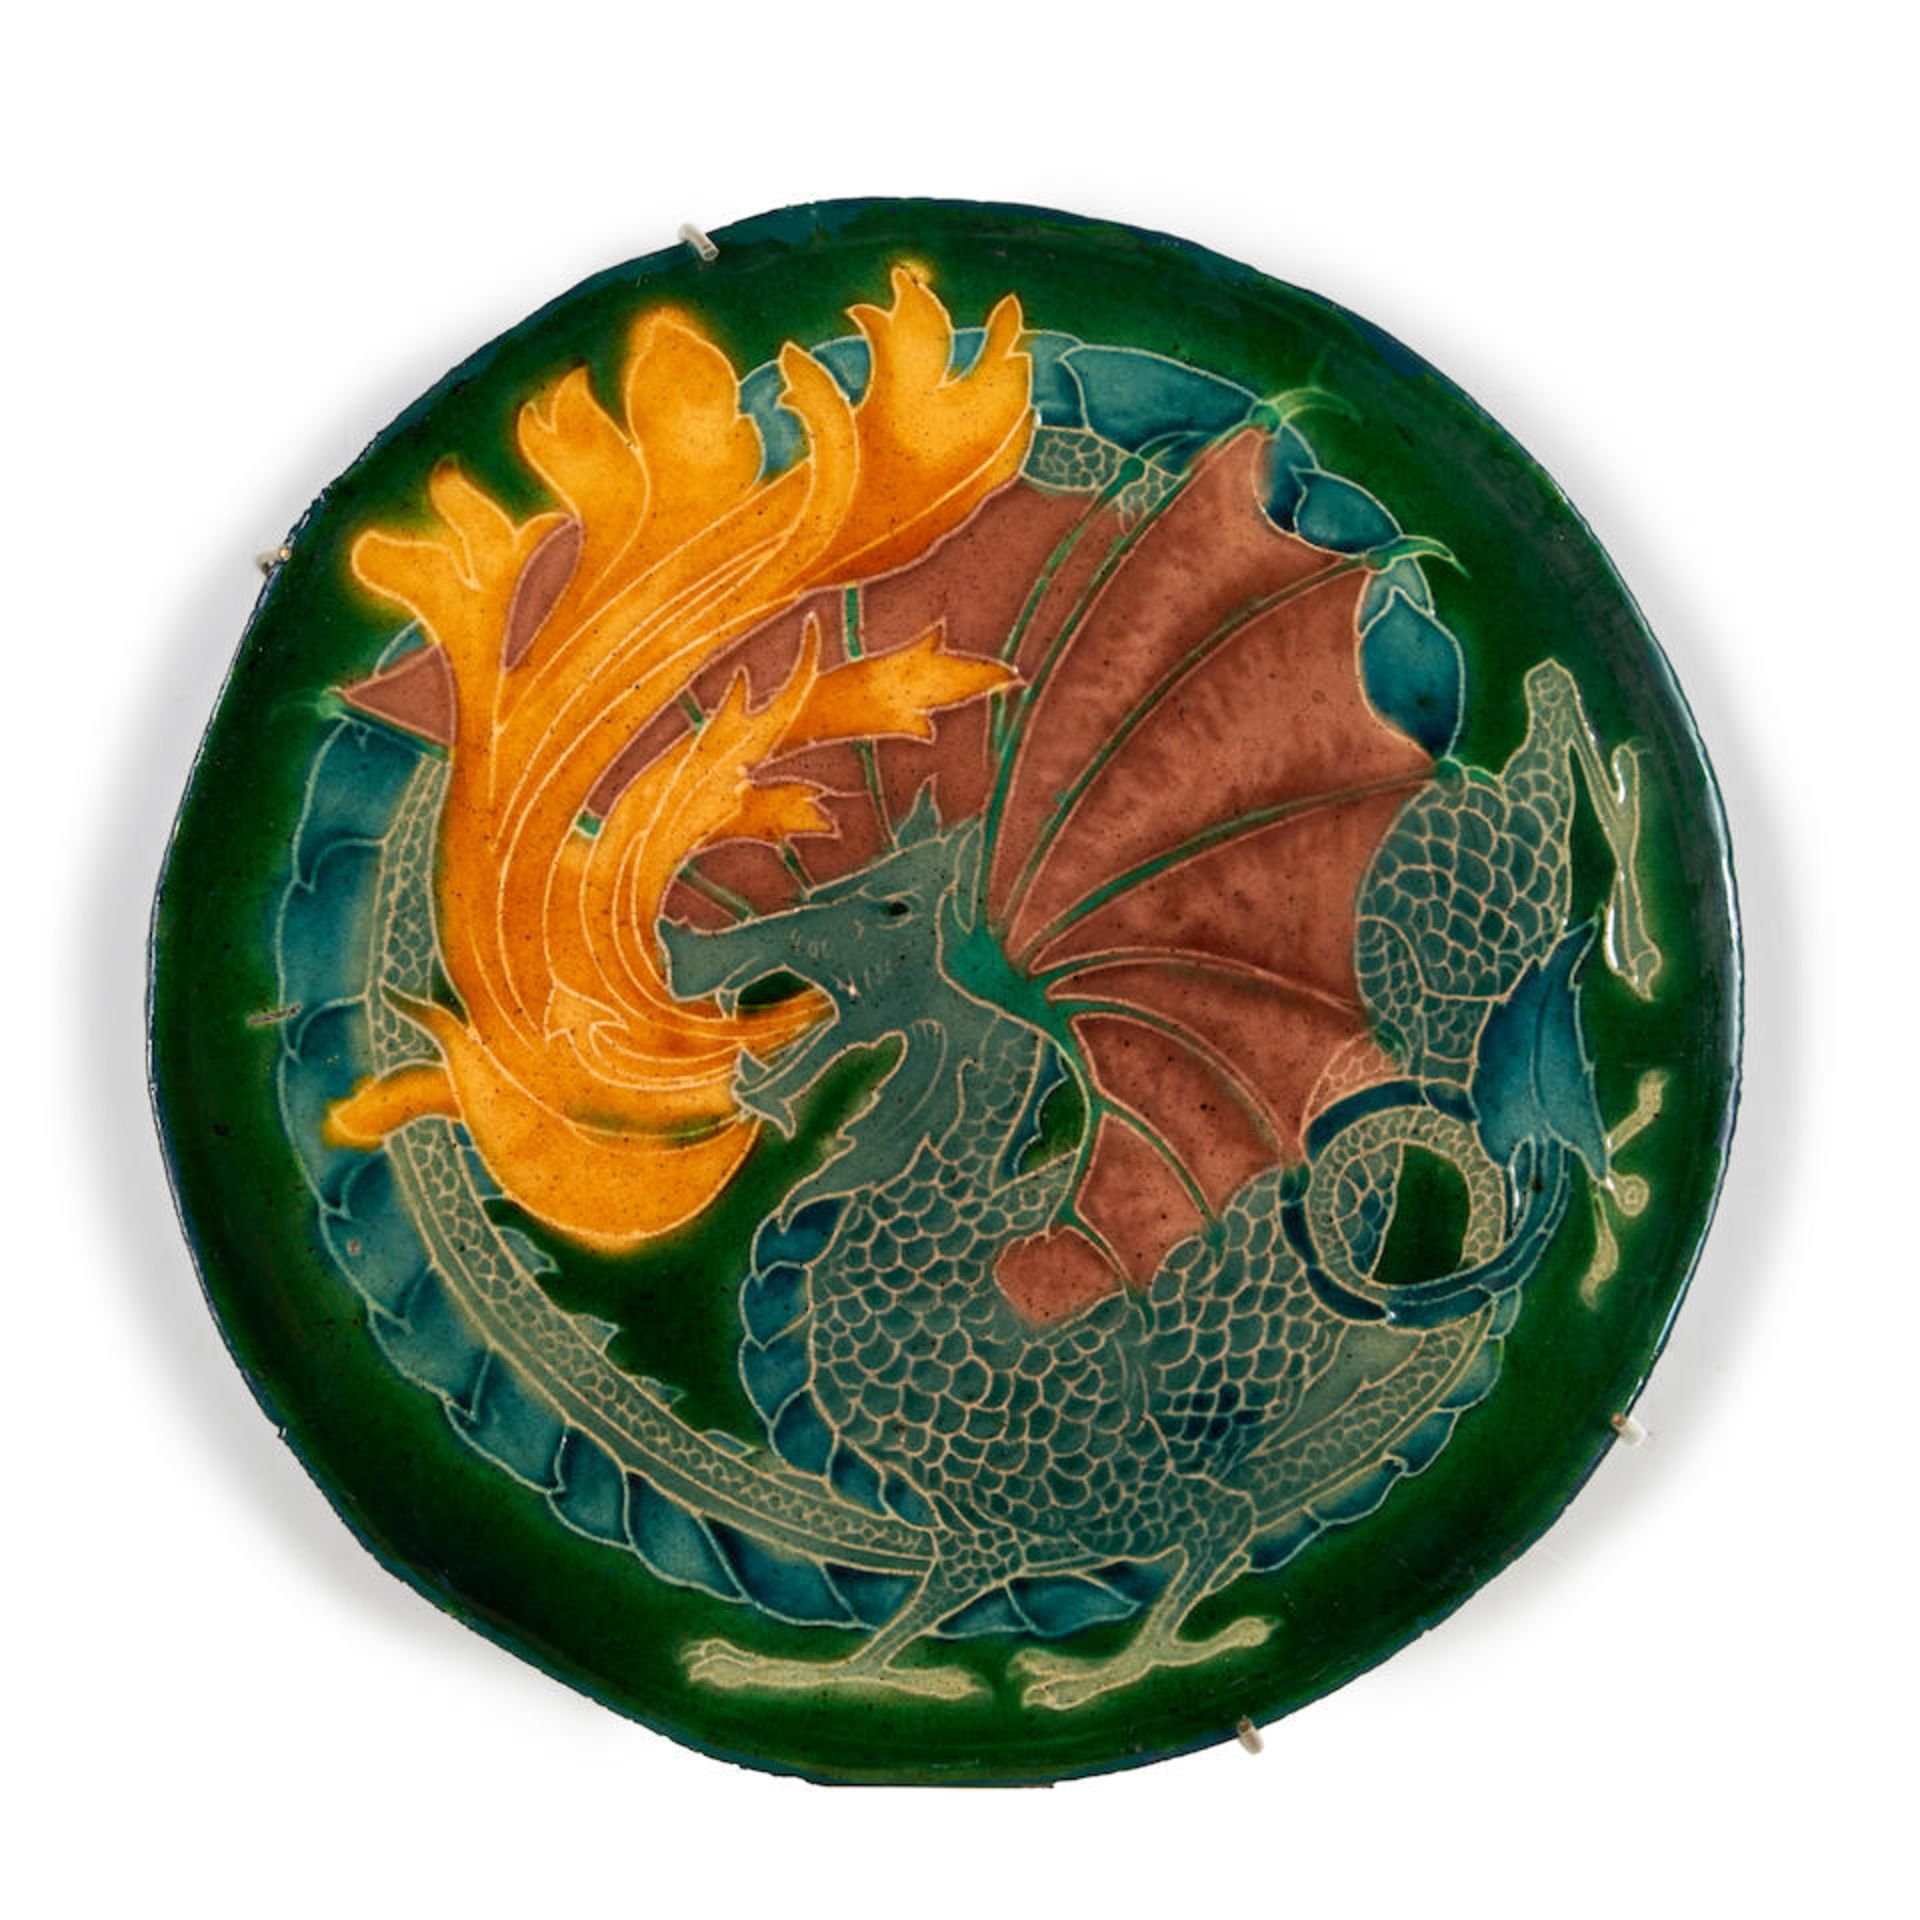 MINTON, HOLLINS & CO. CIRCULAR TILE DEPICTING A DRAGON, England, late 19th century, unmarked, di...